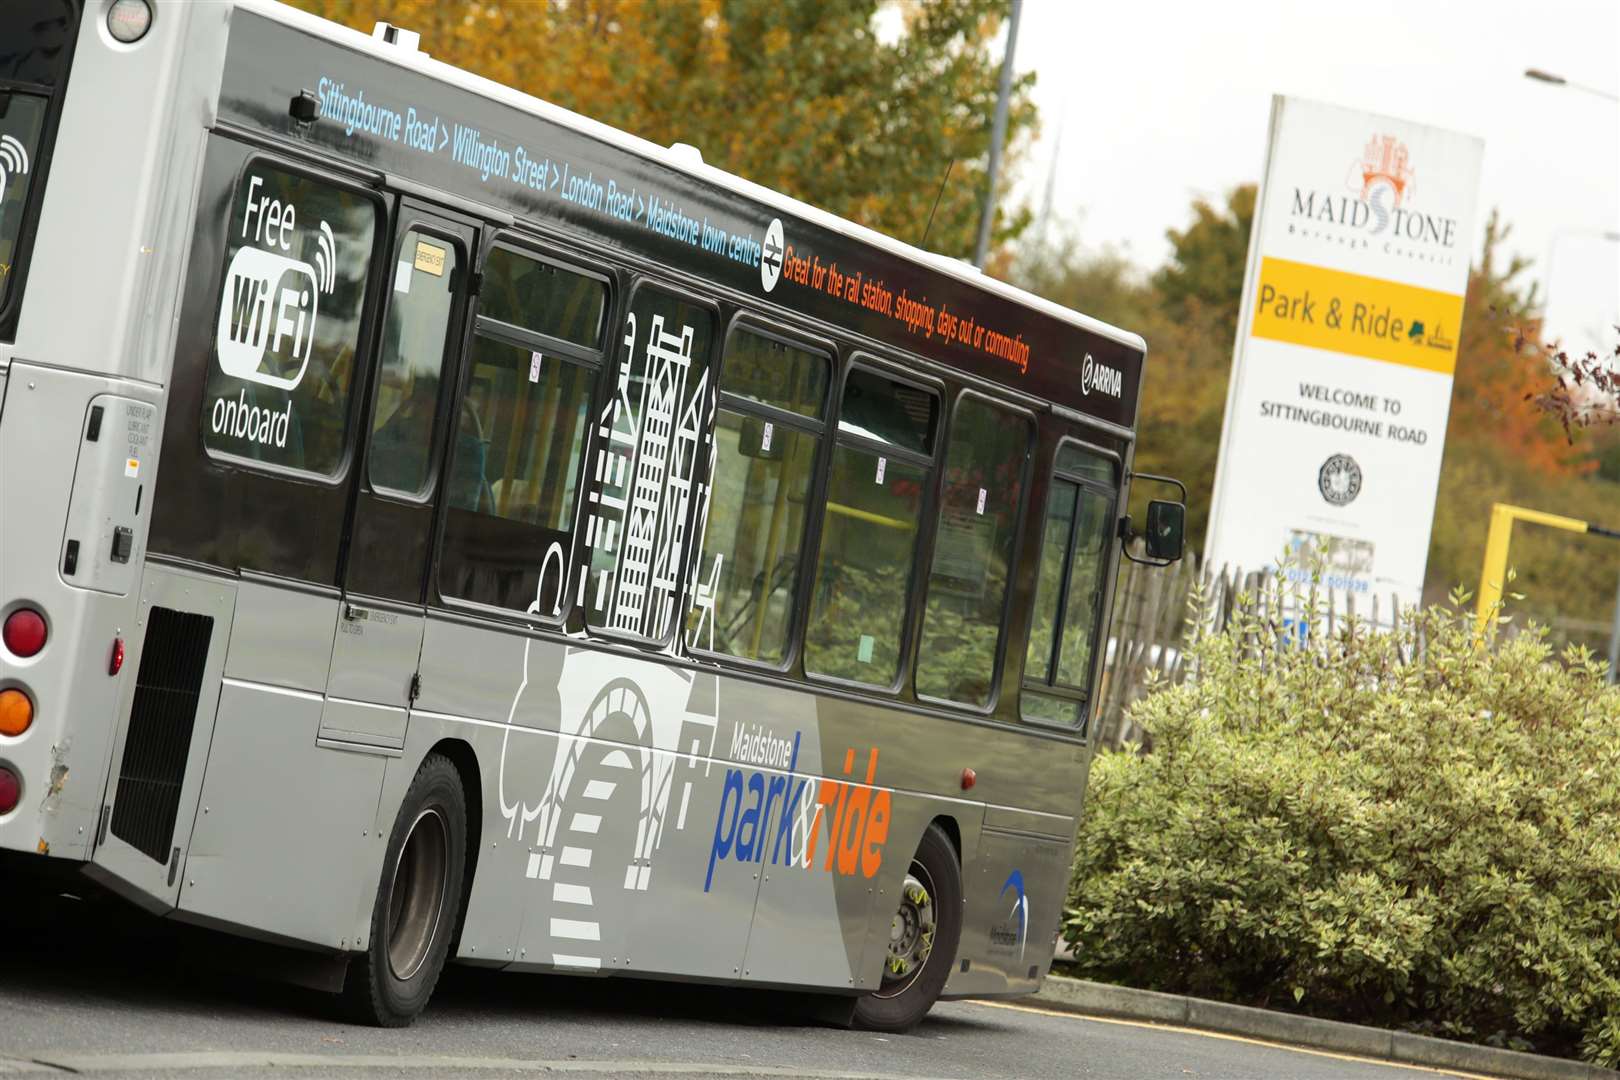 Arriva will take over the park and ride in Maidstone